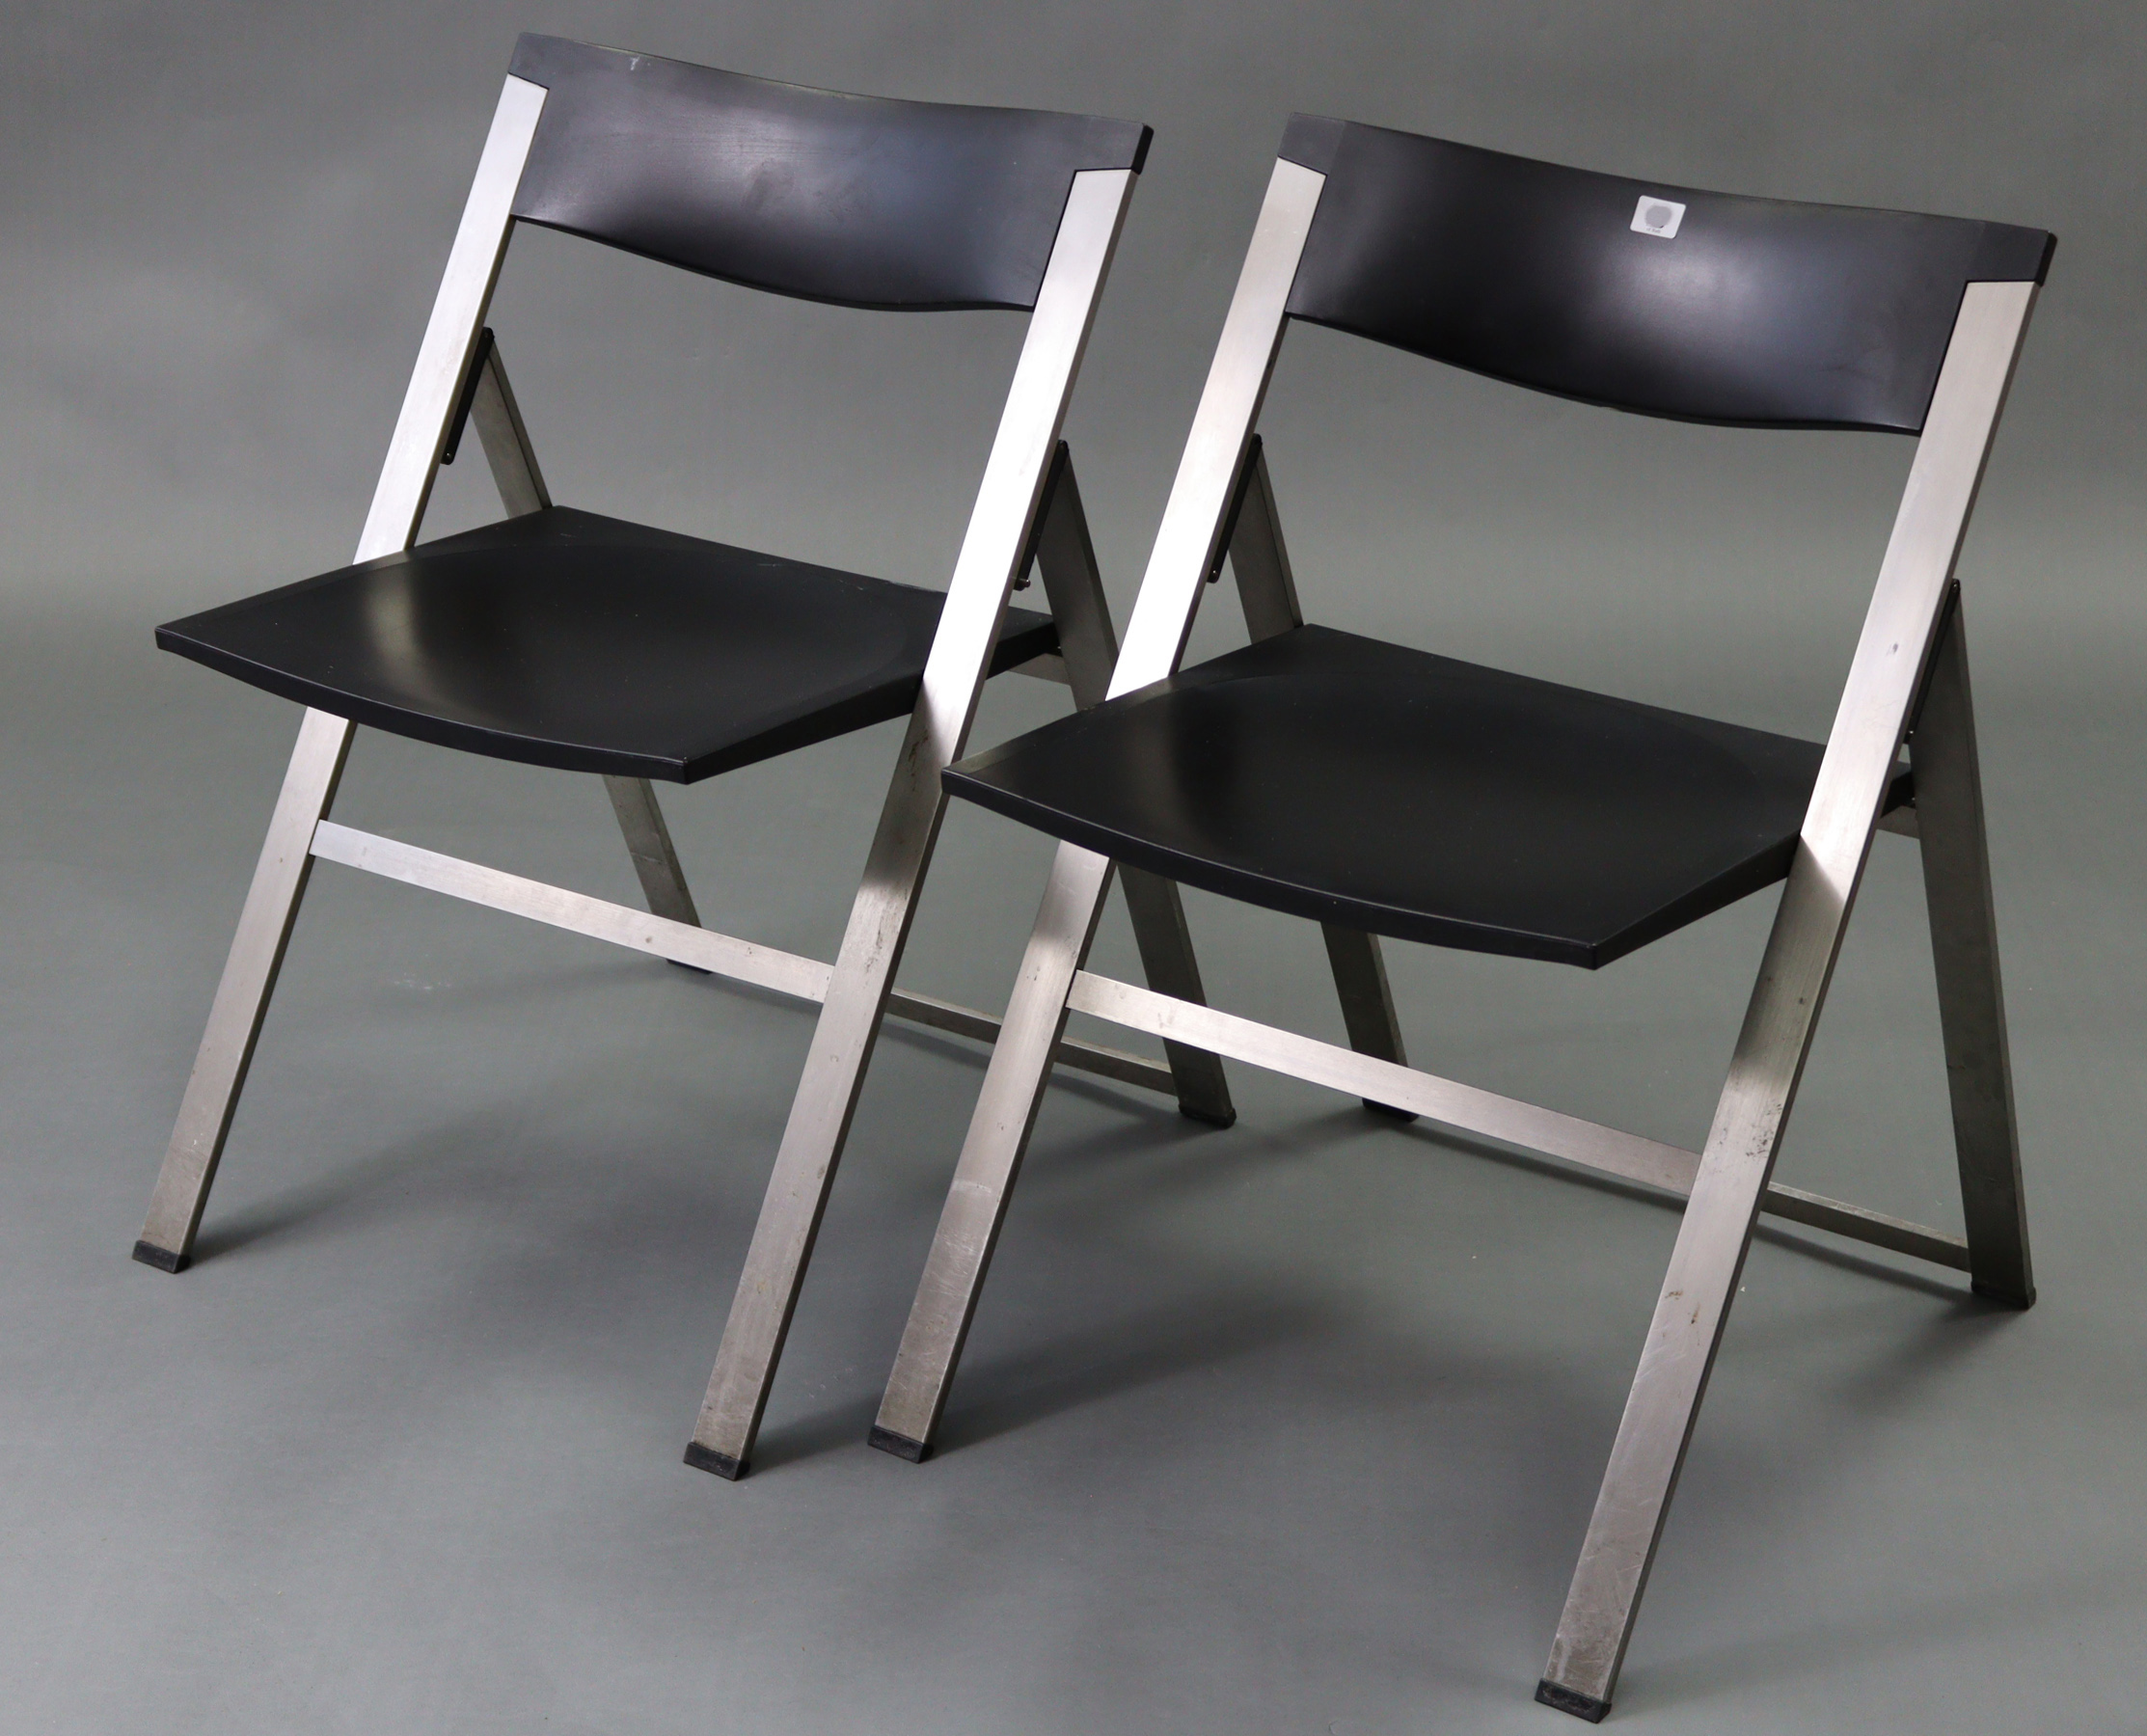 A pair of silvered-metal & black plastic fold-away chairs after a design by Justus Kolburg.